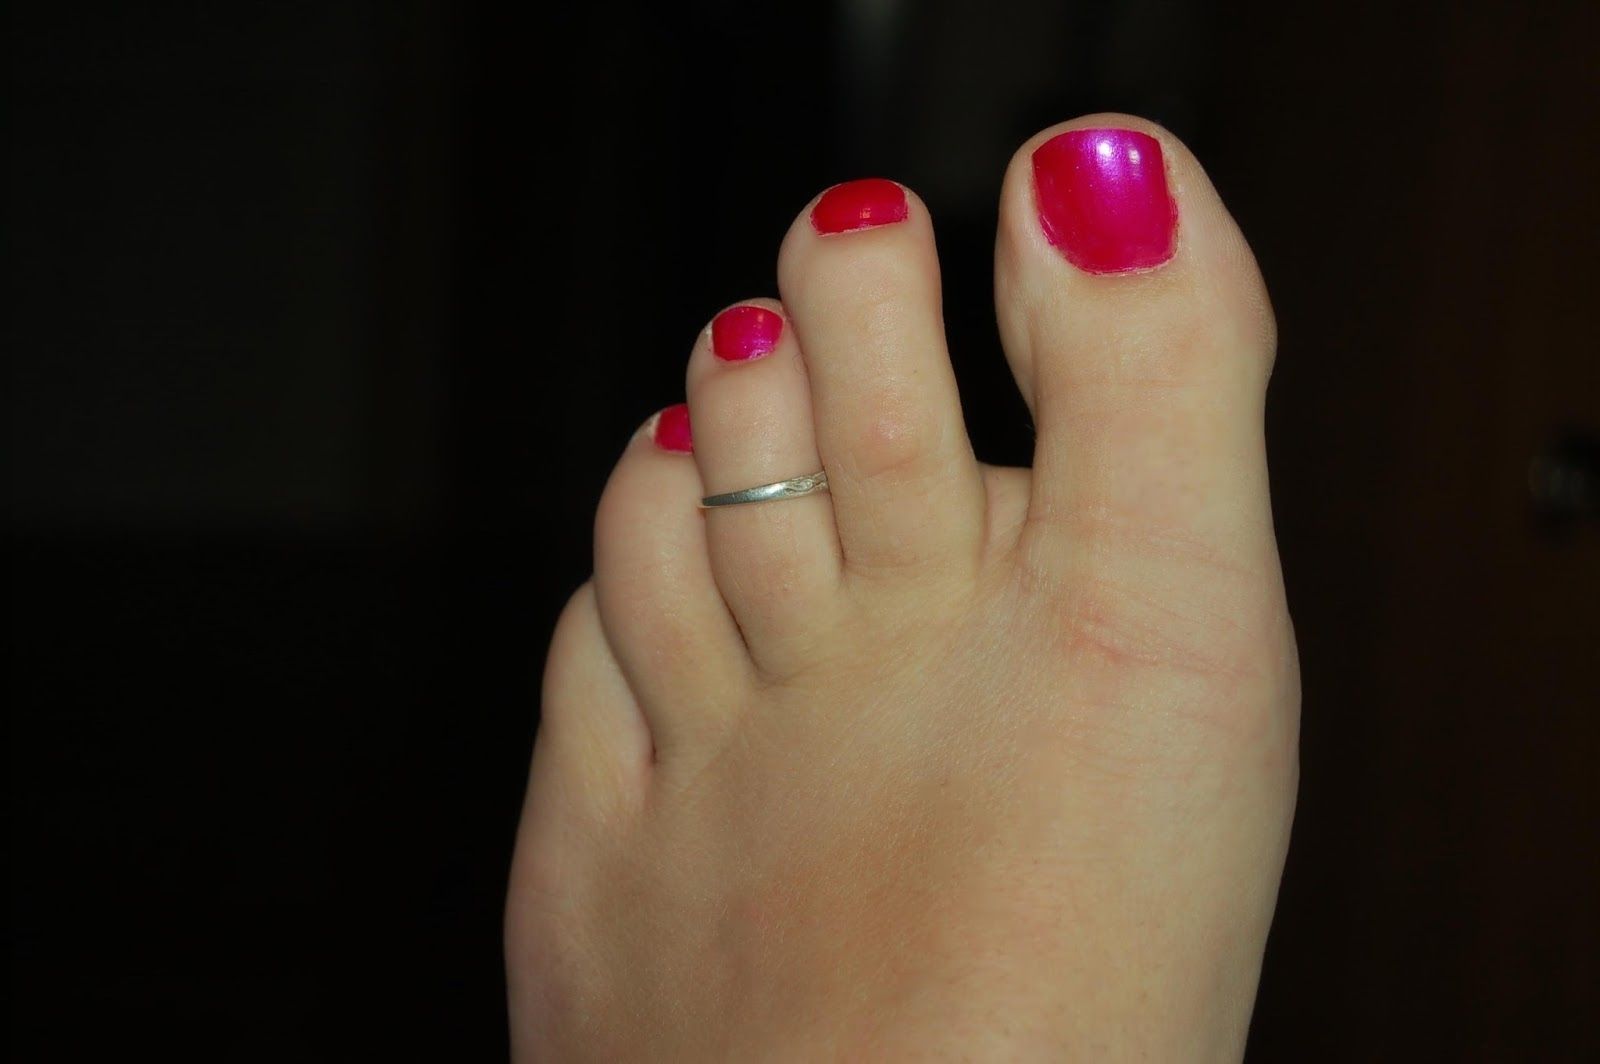 It's Ok For Men To Have Painted Nails In Public: What About Toe Pertaining To 2018 Mens Toe Rings (View 2 of 10)